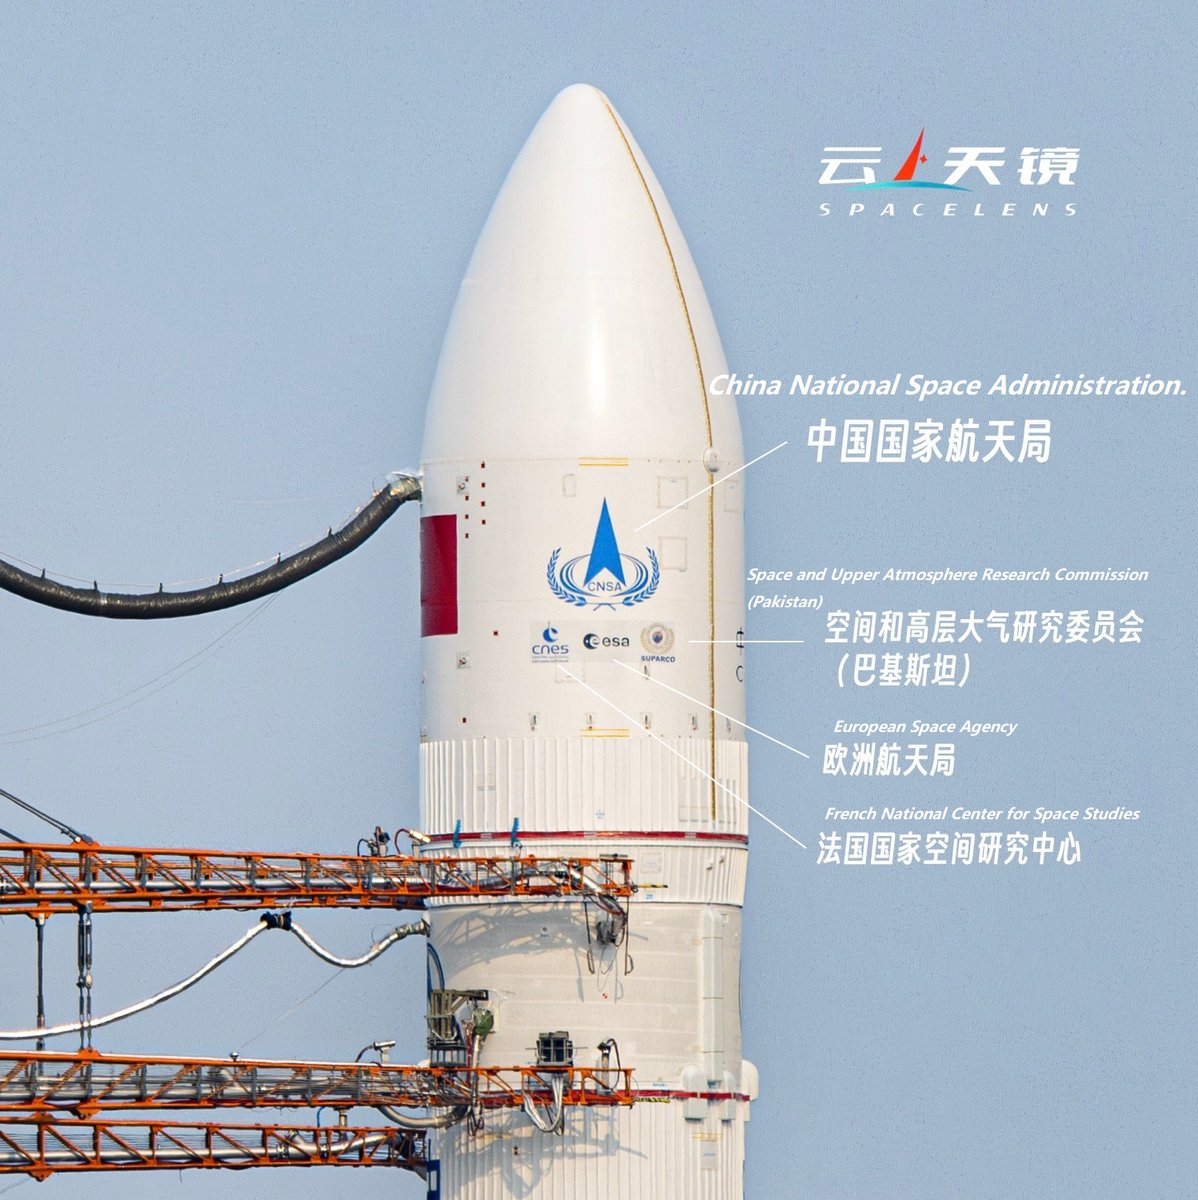 China is about to launch its sixth lunar exploration mission, which will collect the first-ever samples from the far side of the Moon and bring them back to Earth. The Chang'e-6 rocket is scheduled to launch on May 3rd.